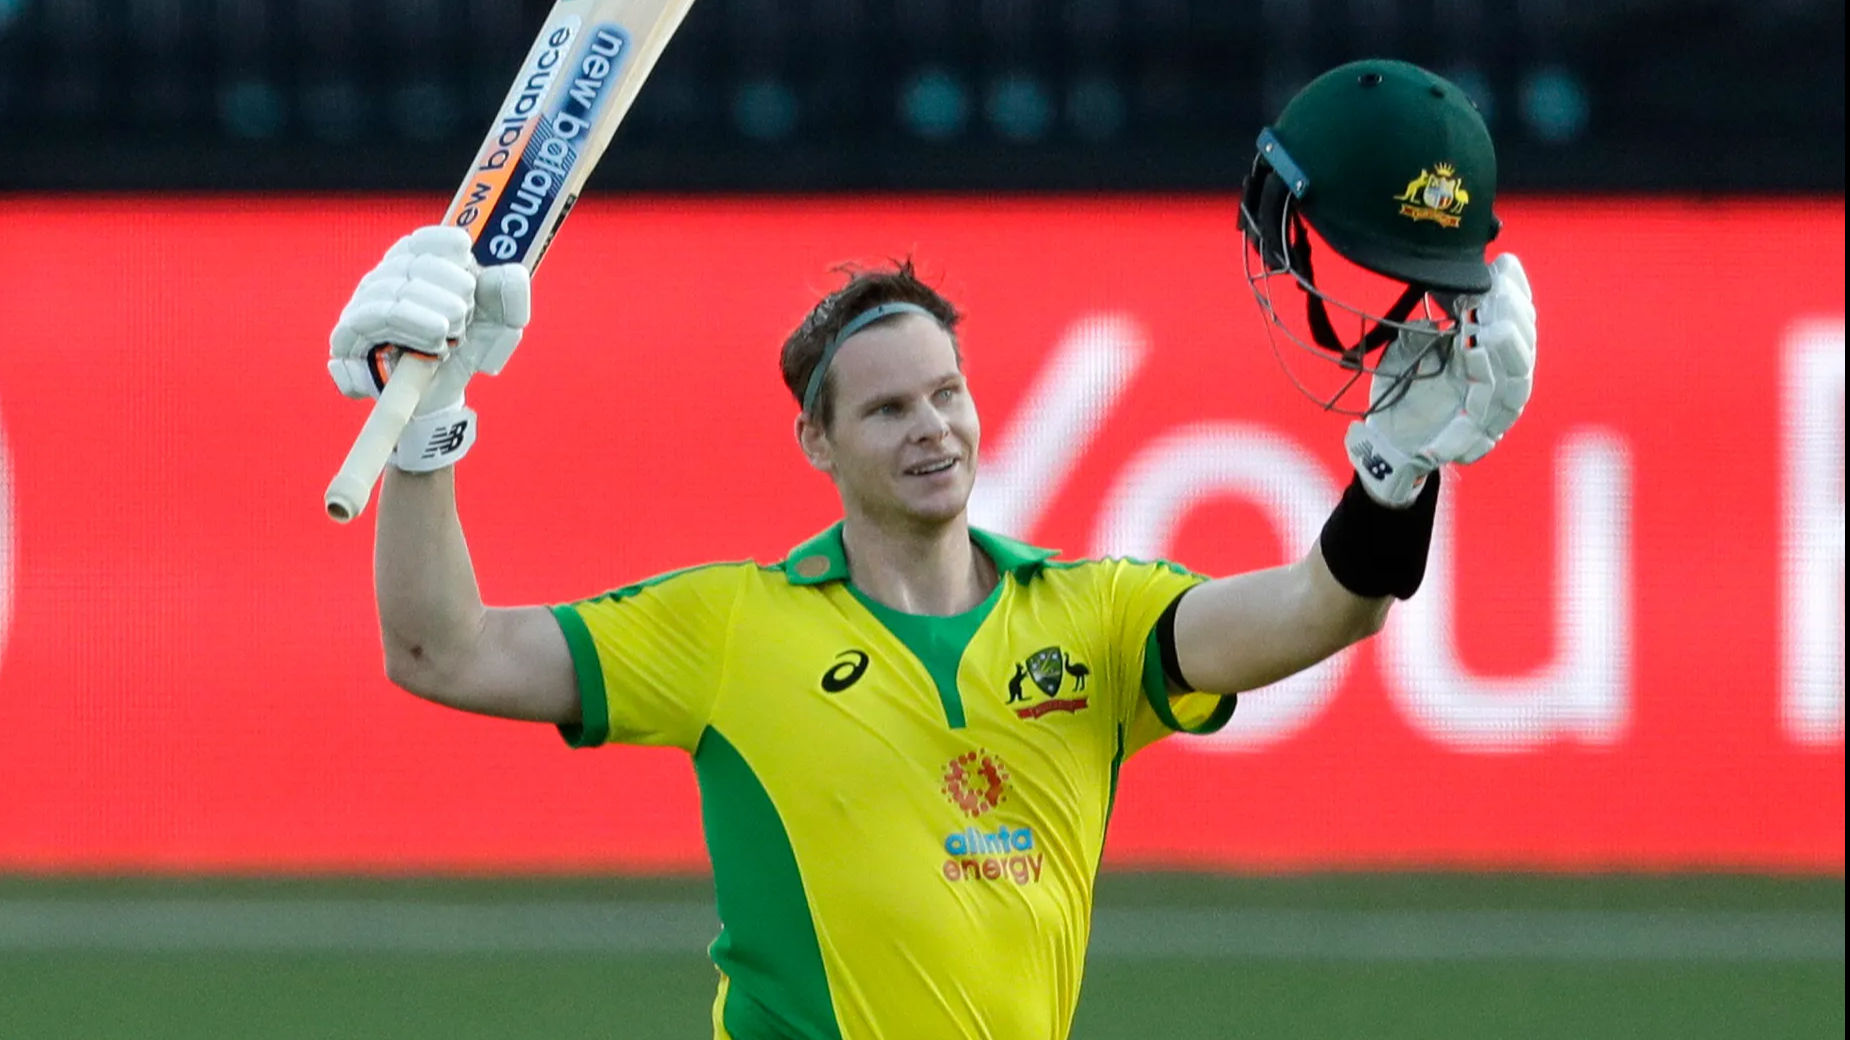 Steve Smith, Aaron Finch star as Australia cruise to 66-run victory against India